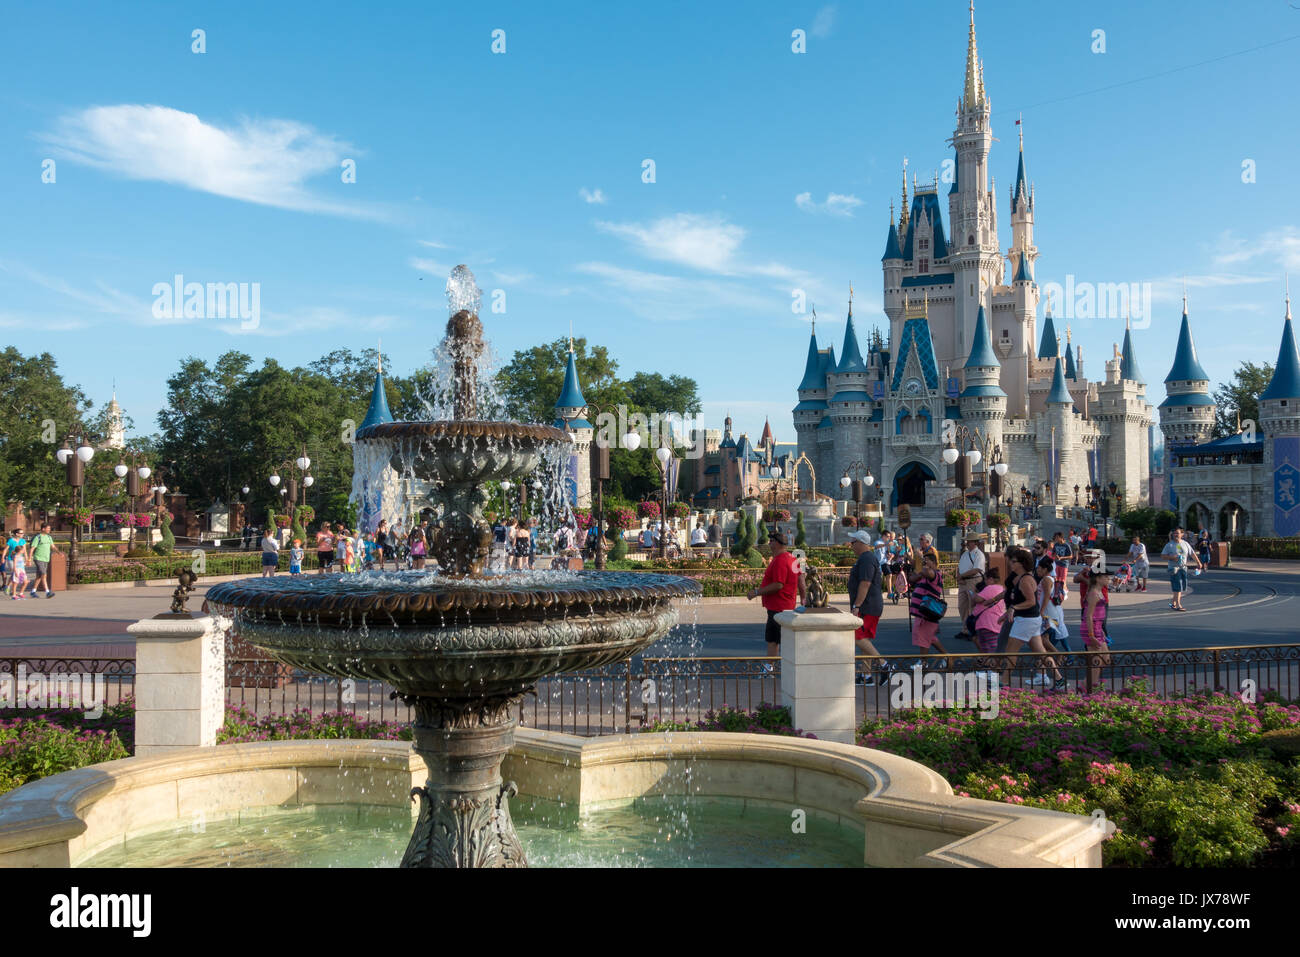 Fountain in the Hub area of Magic Kingdom with Cinderalla Castle in the background Stock Photo